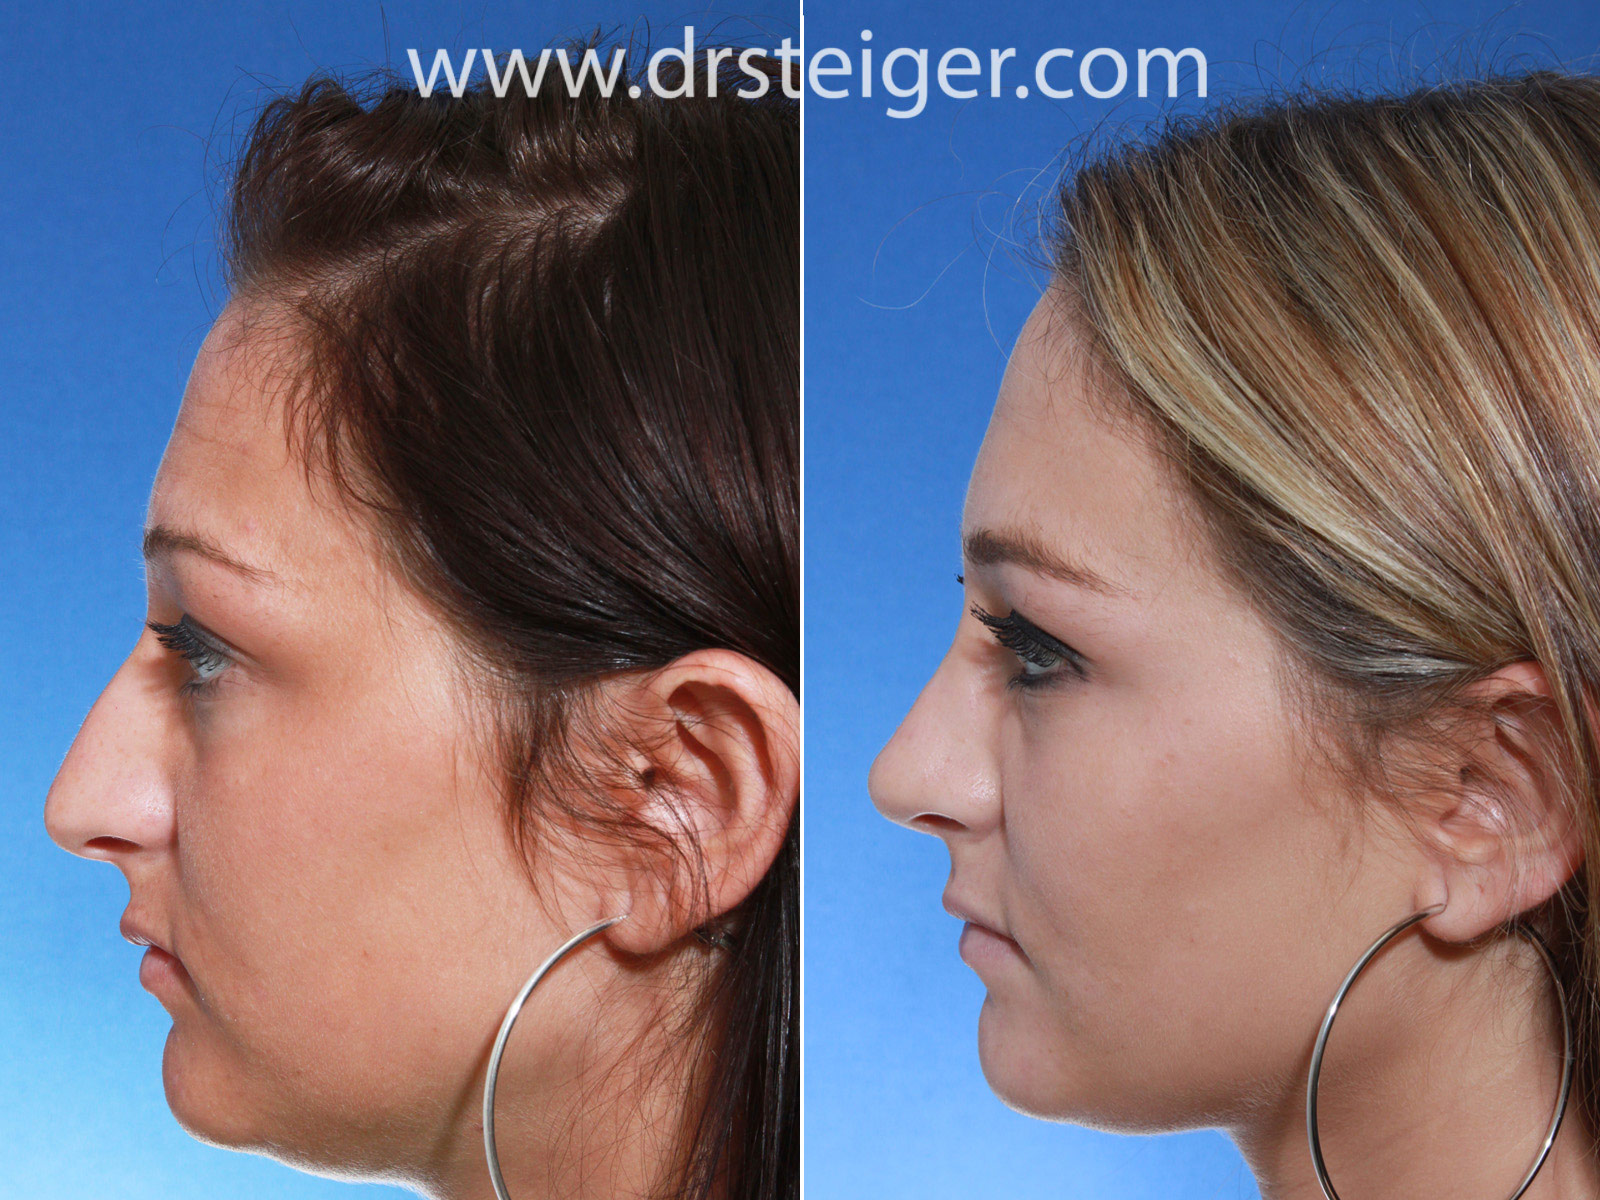 Nose Job (Rhinoplasty) Pictures of a Female